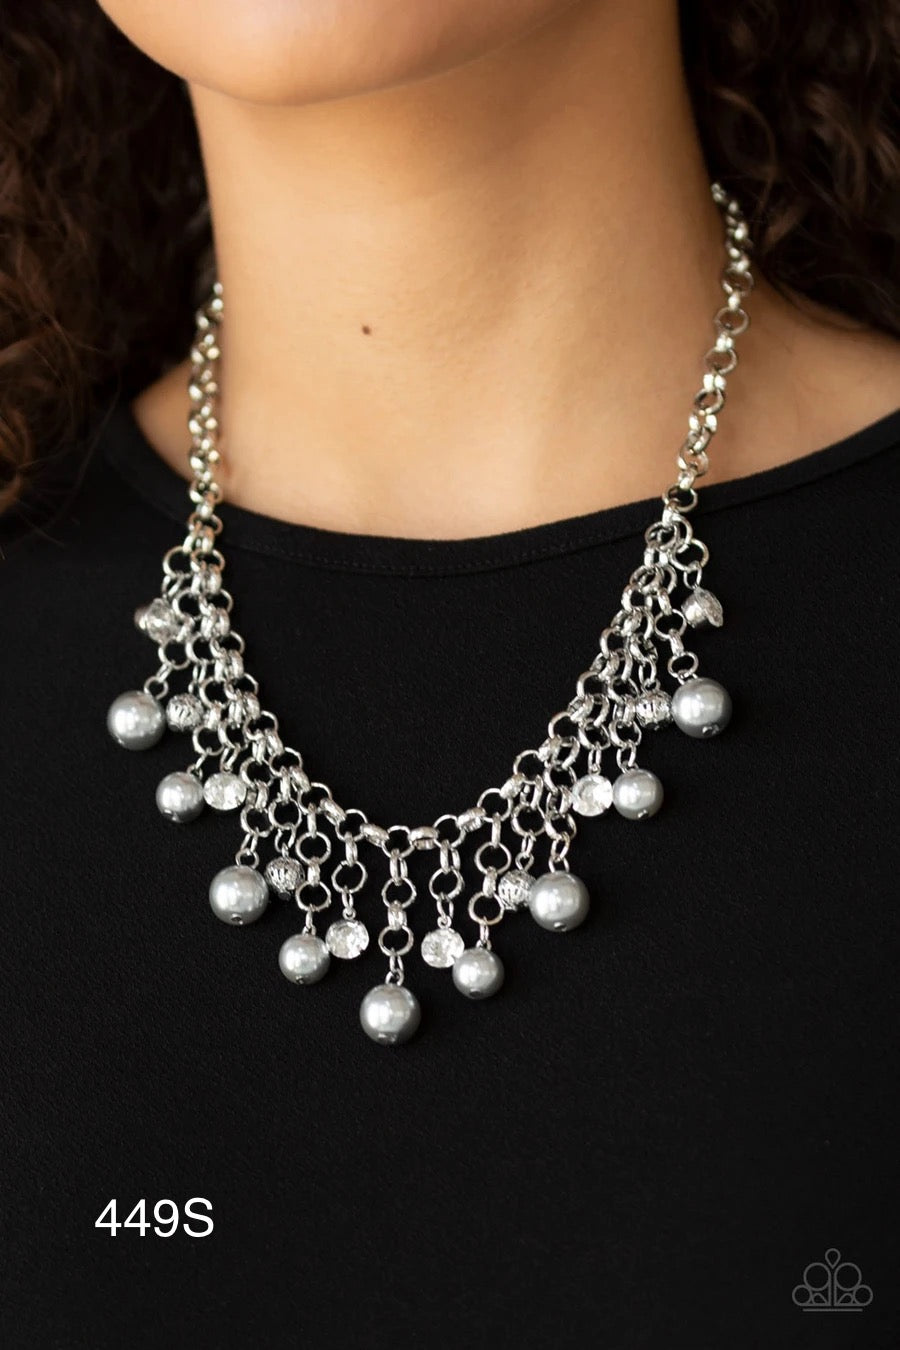 Paparazzi “Heir-headed” Silver Necklace Earring Set